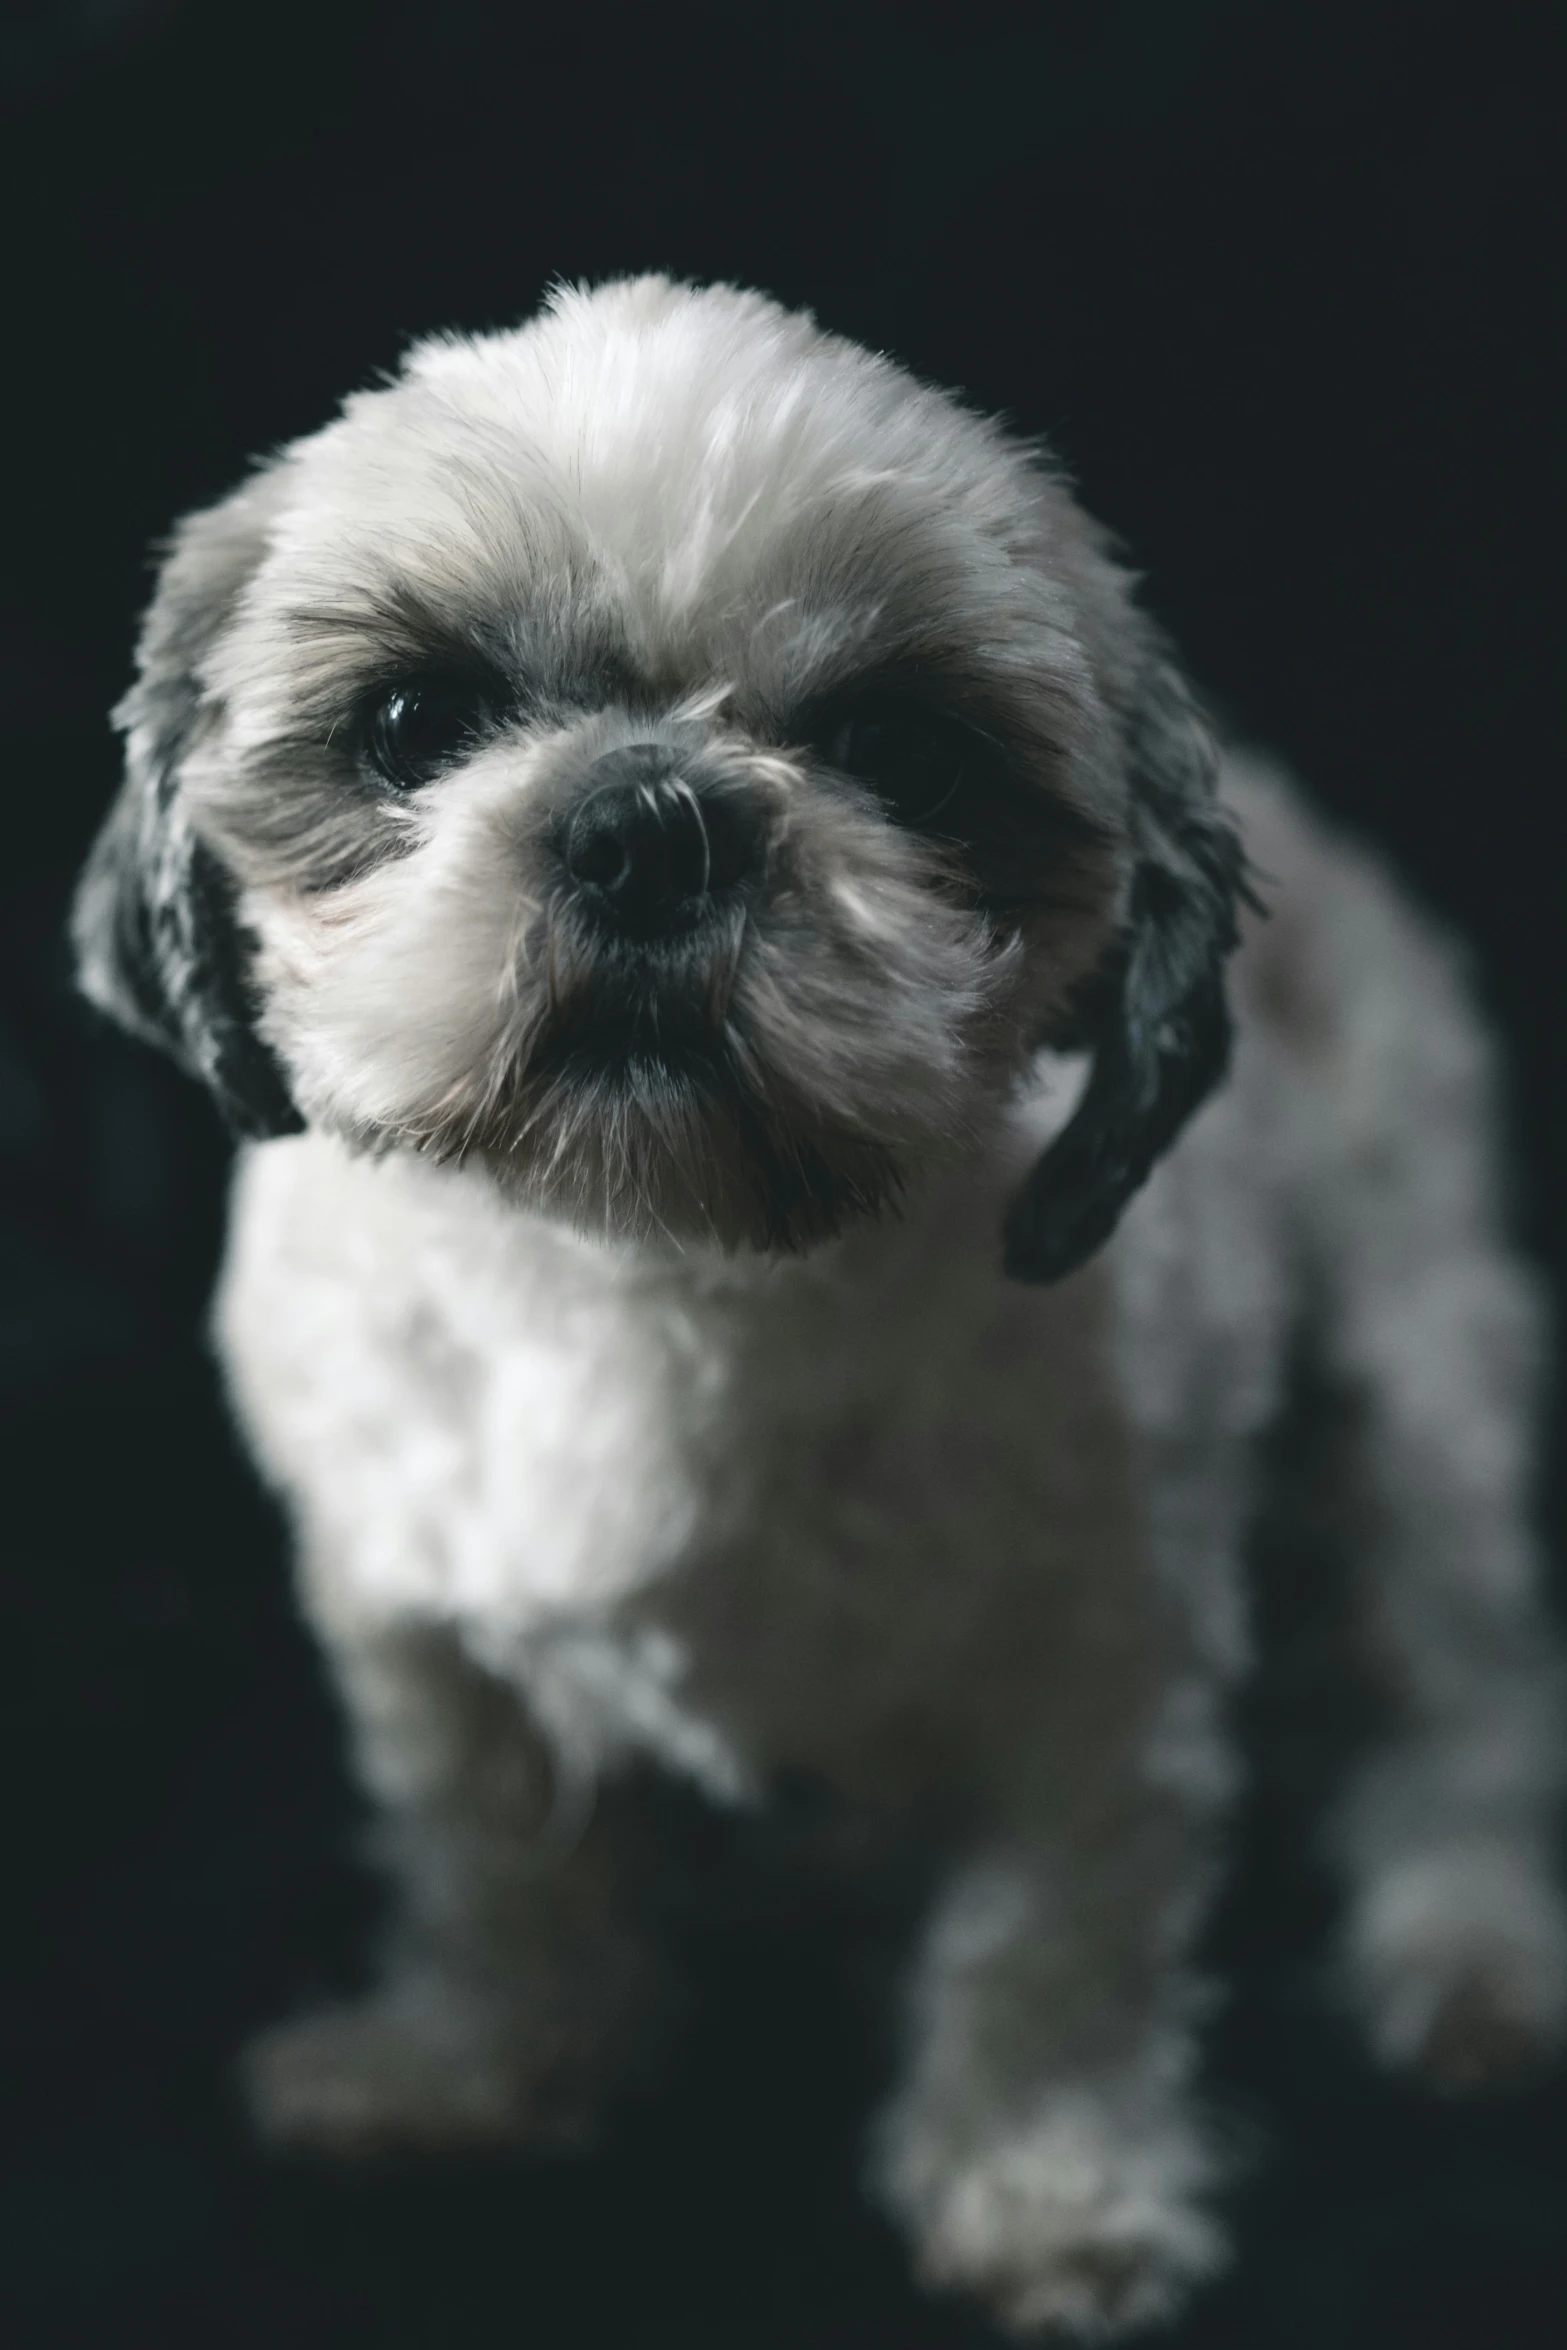 a small dog stands close up looking at the camera